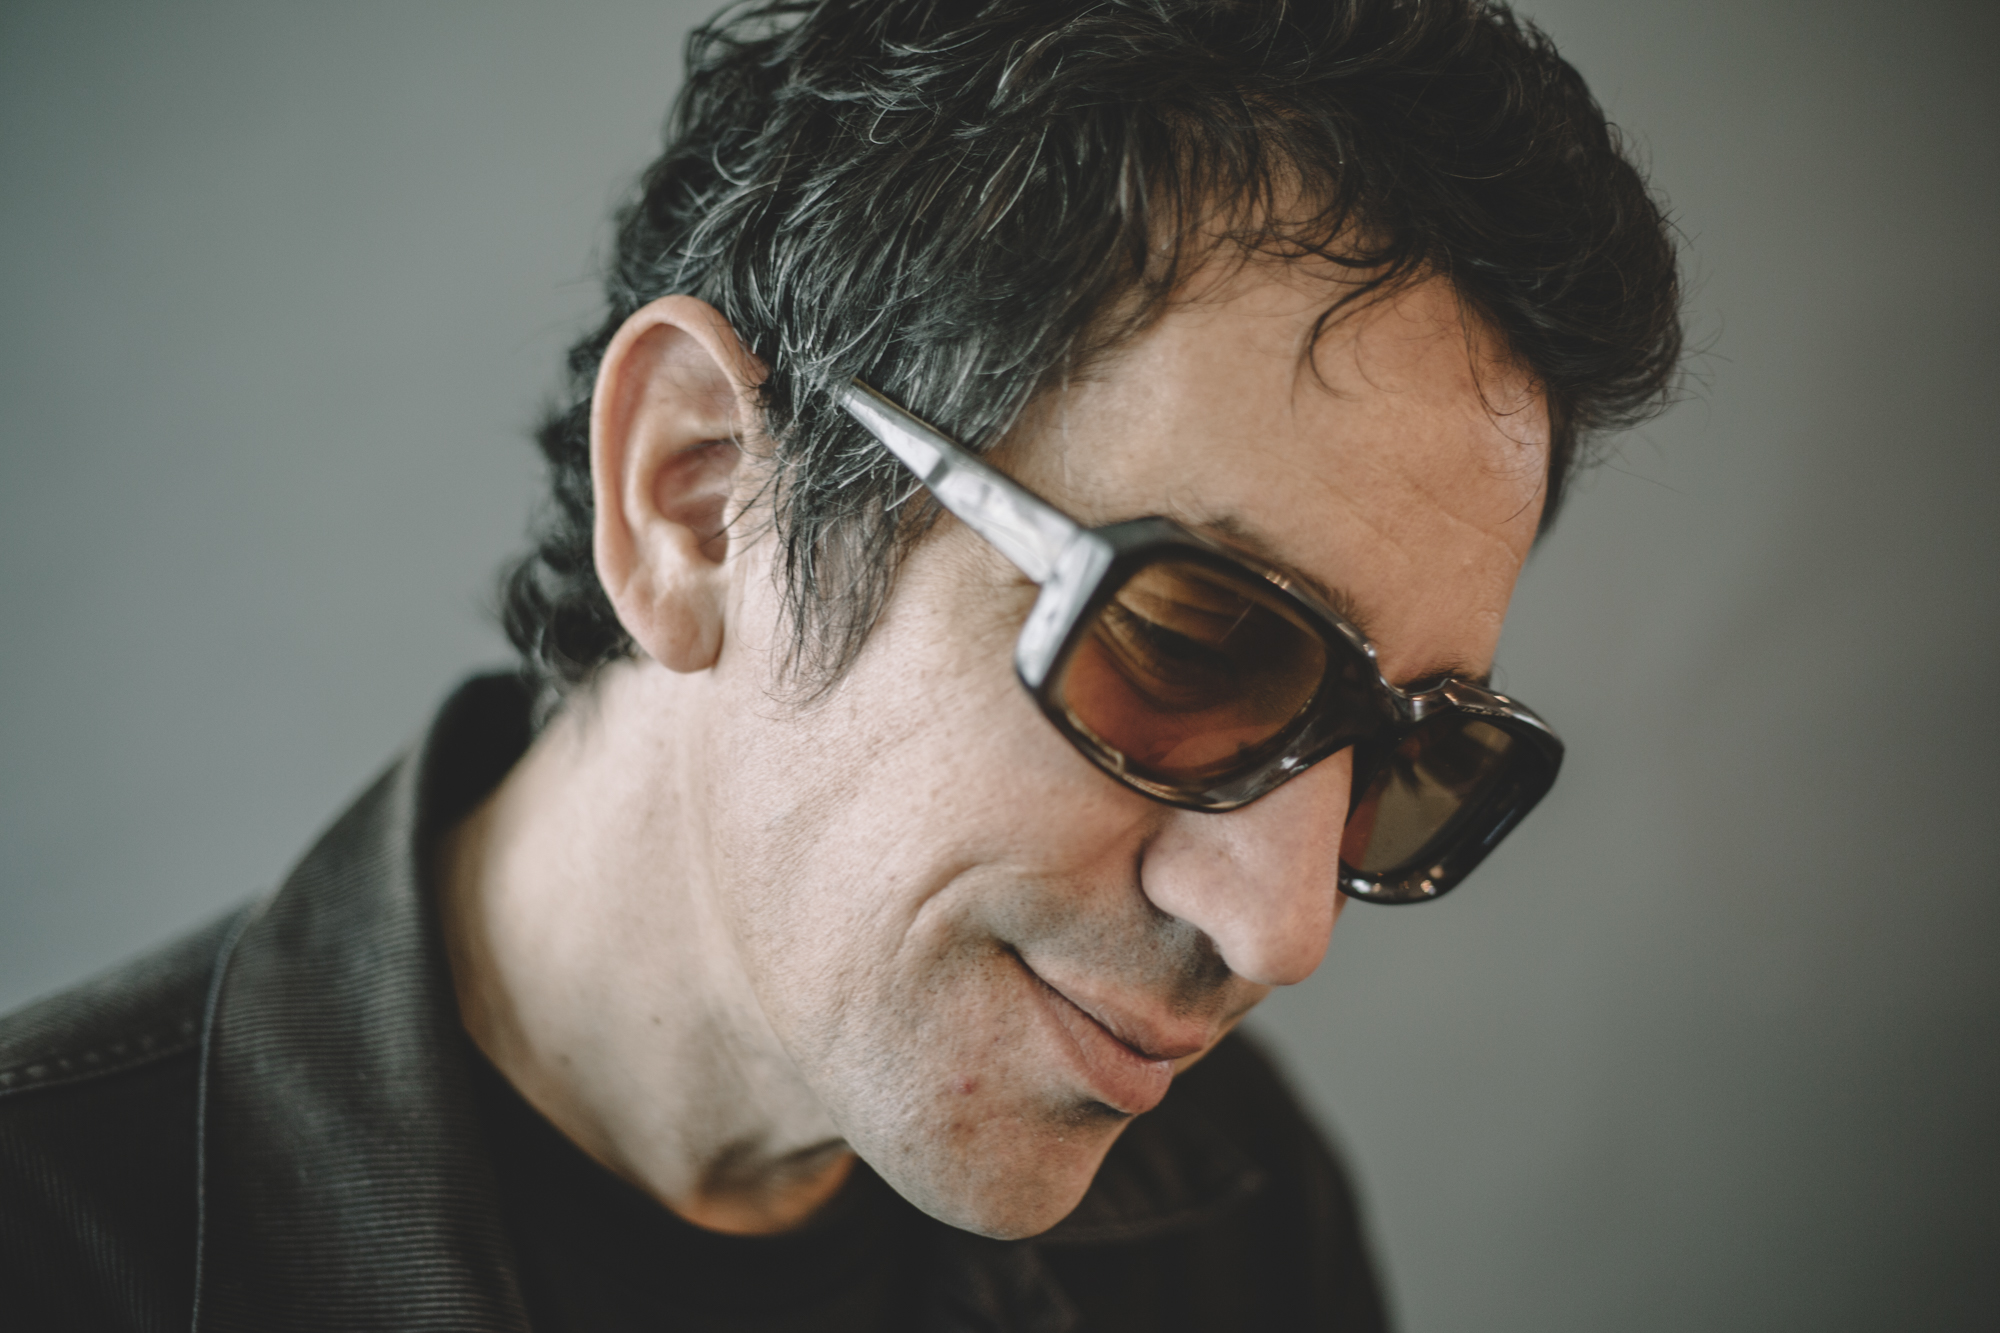 A.J. Croce Reveals a Life’s Worth of Covers on ‘By Request,’ Shares Rendition of “Ooh Child”